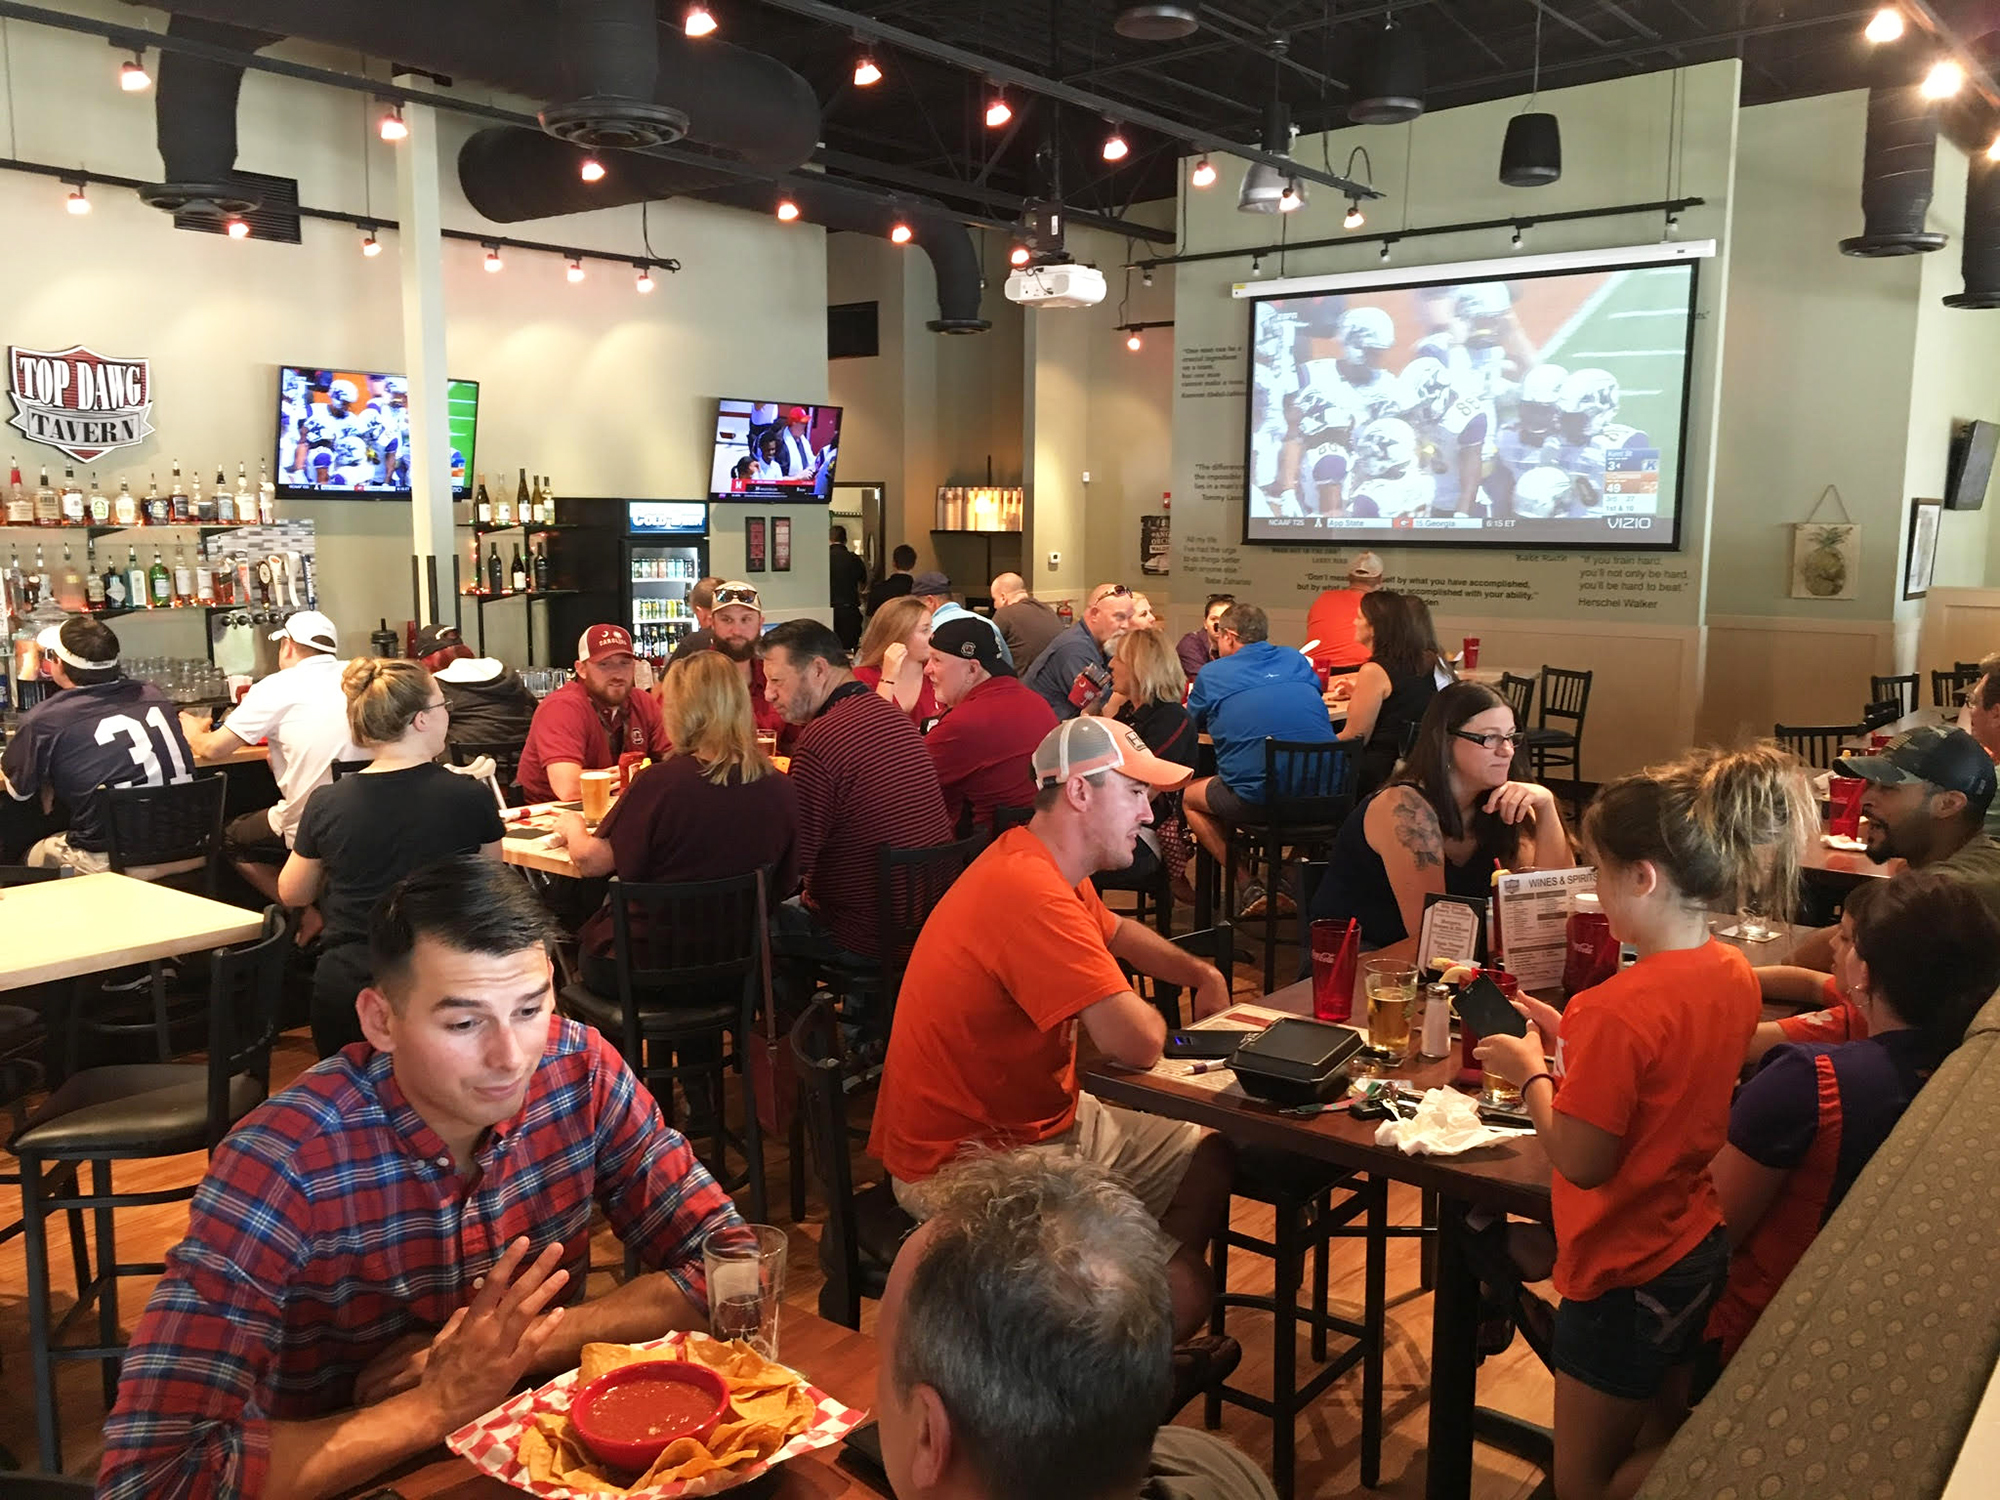 The restaurants offer the SEC Network, ACC Network and Big Ten Network as well as NFL Sunday Ticket.